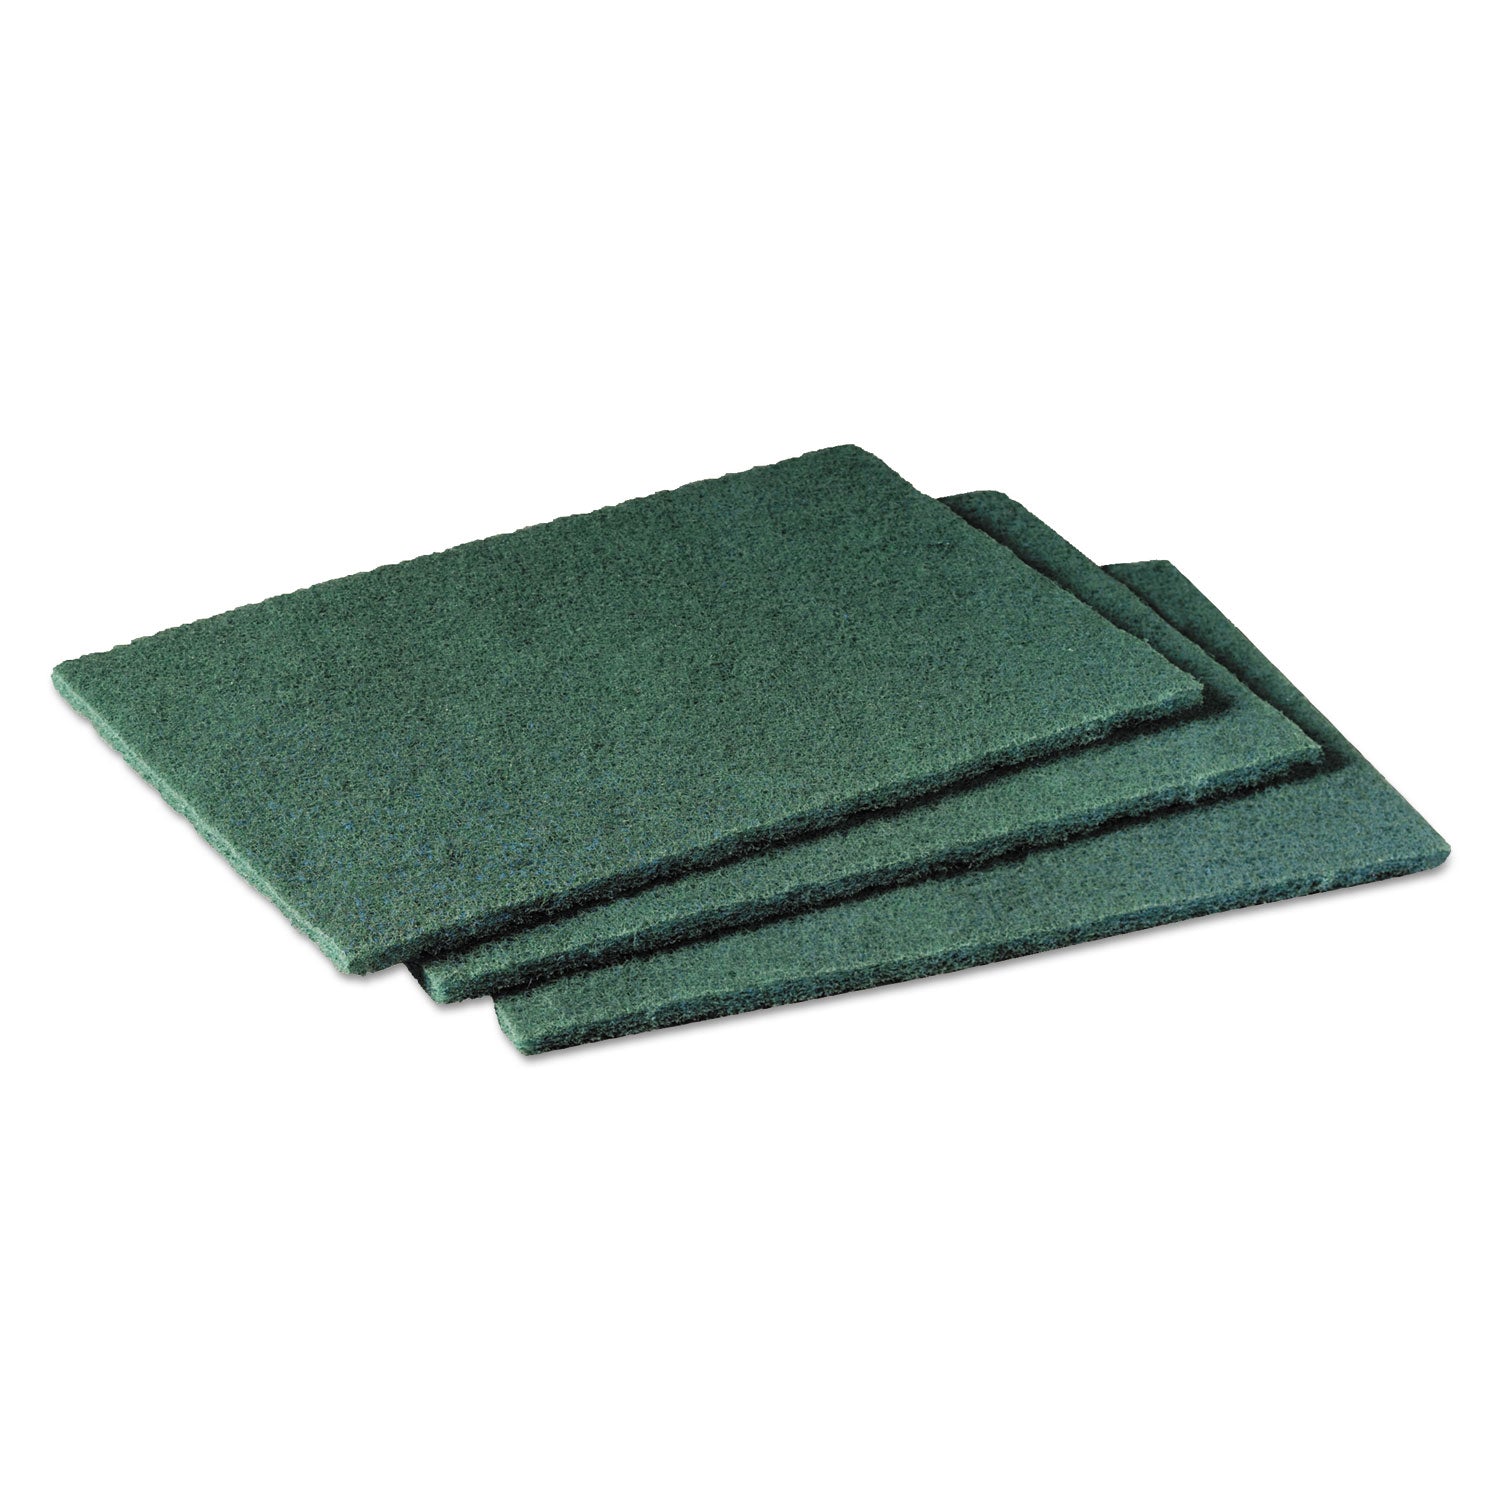 Commercial Scouring Pad 96, 6 x 9, Green, 10/Pack - 